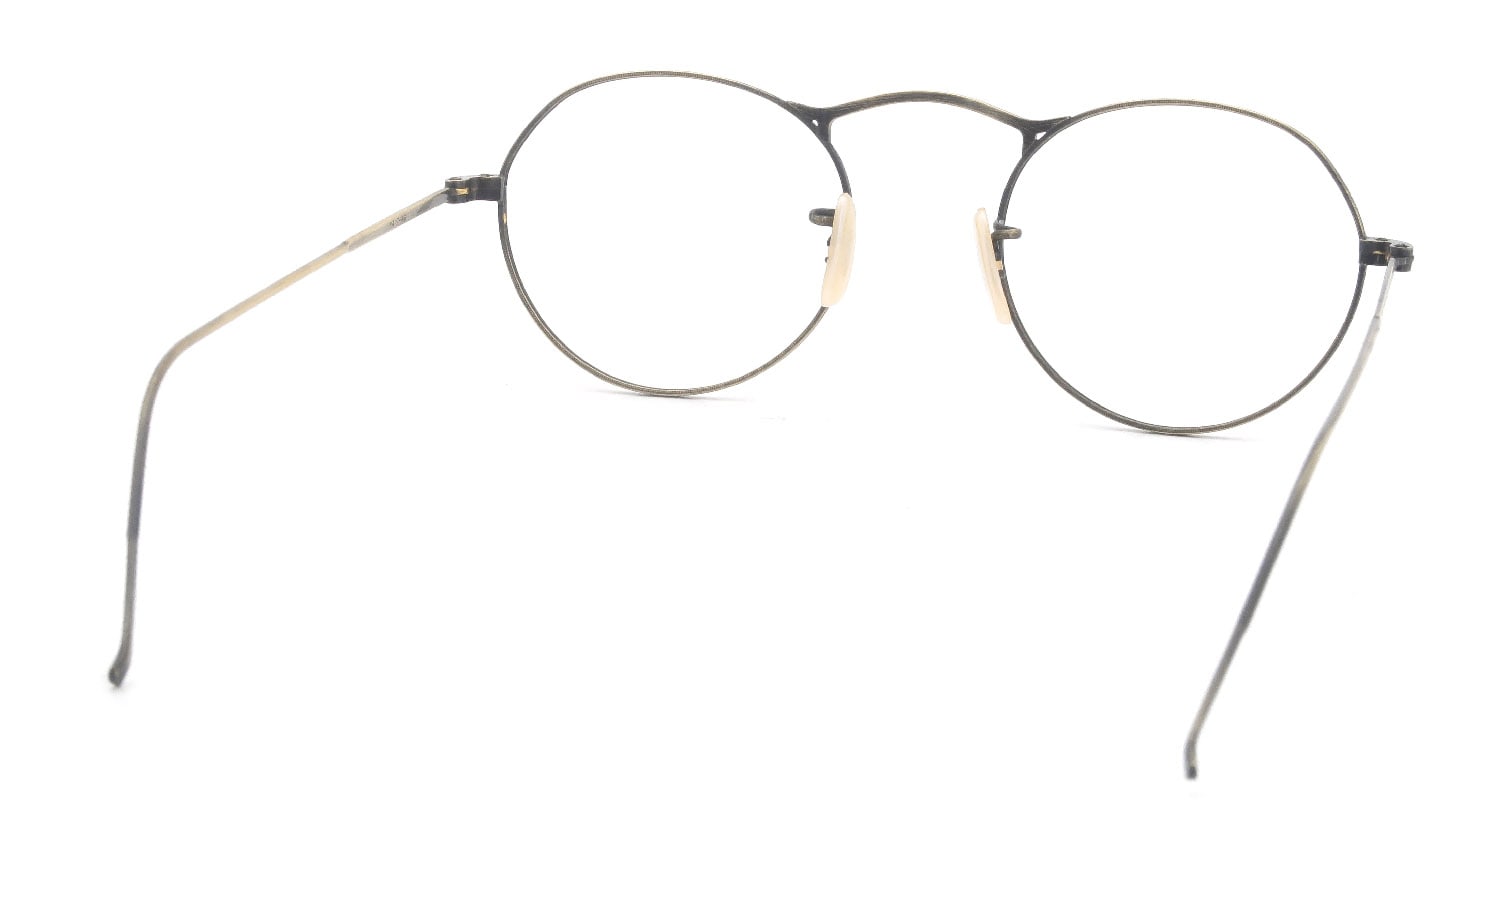 OLIVER PEOPLES archive 初期：M4 T-AG